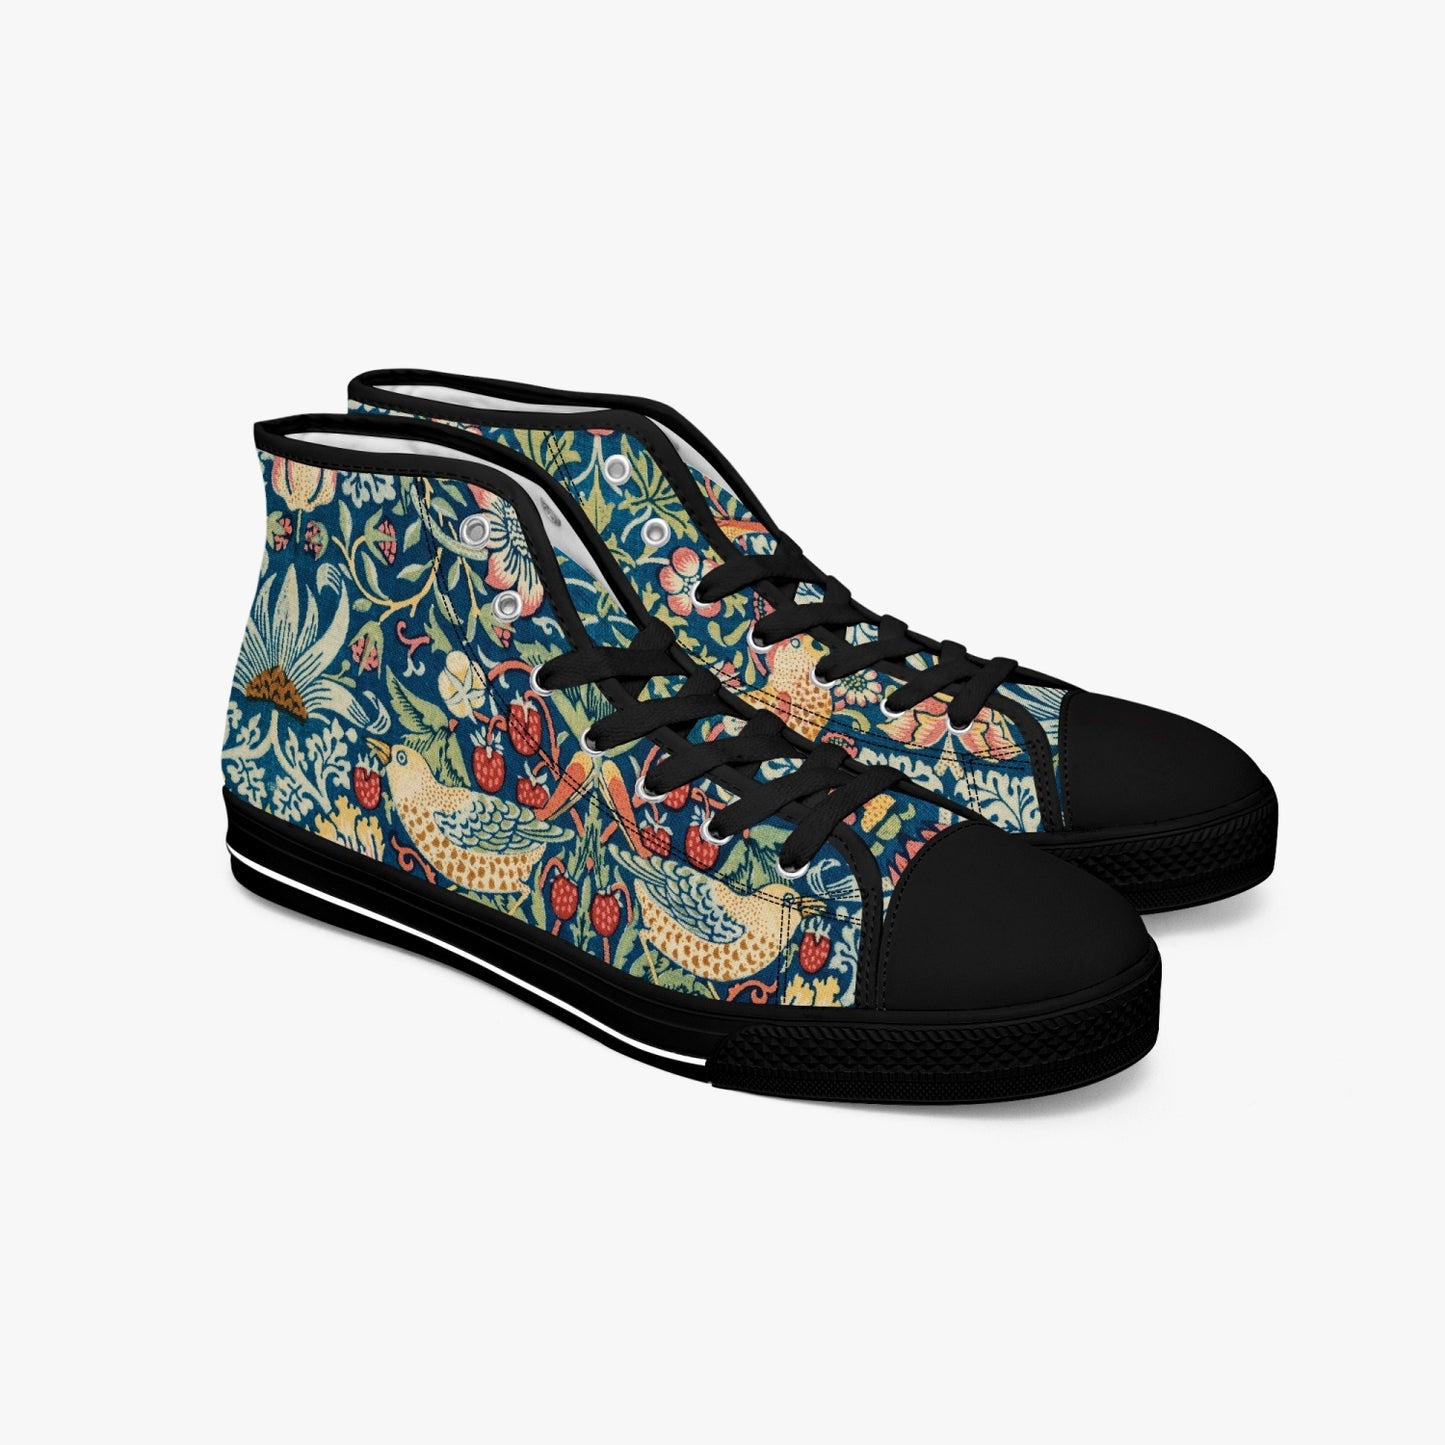 Flowered Sneakers: Canvas High-Tops with Strawberry Thief William Morris Wallpaper Design